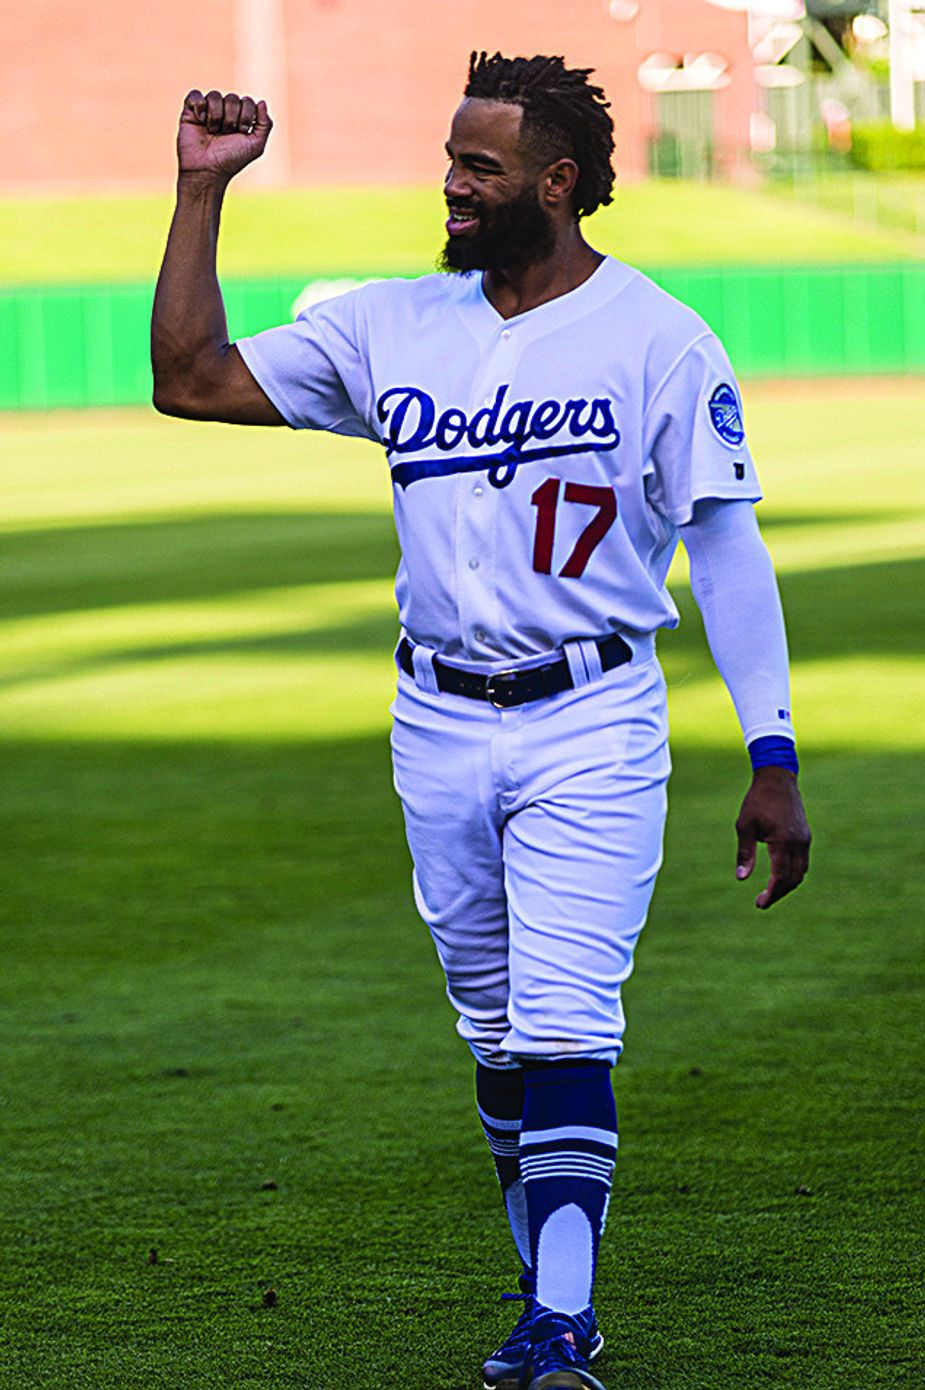 Edwin Rios was drafted by the Dodgers organization in 2015 and played for the Tulsa Drillers and Oklahoma City Dodgers before moving up to the big leagues with the Los Angeles Dodgers in 2019.